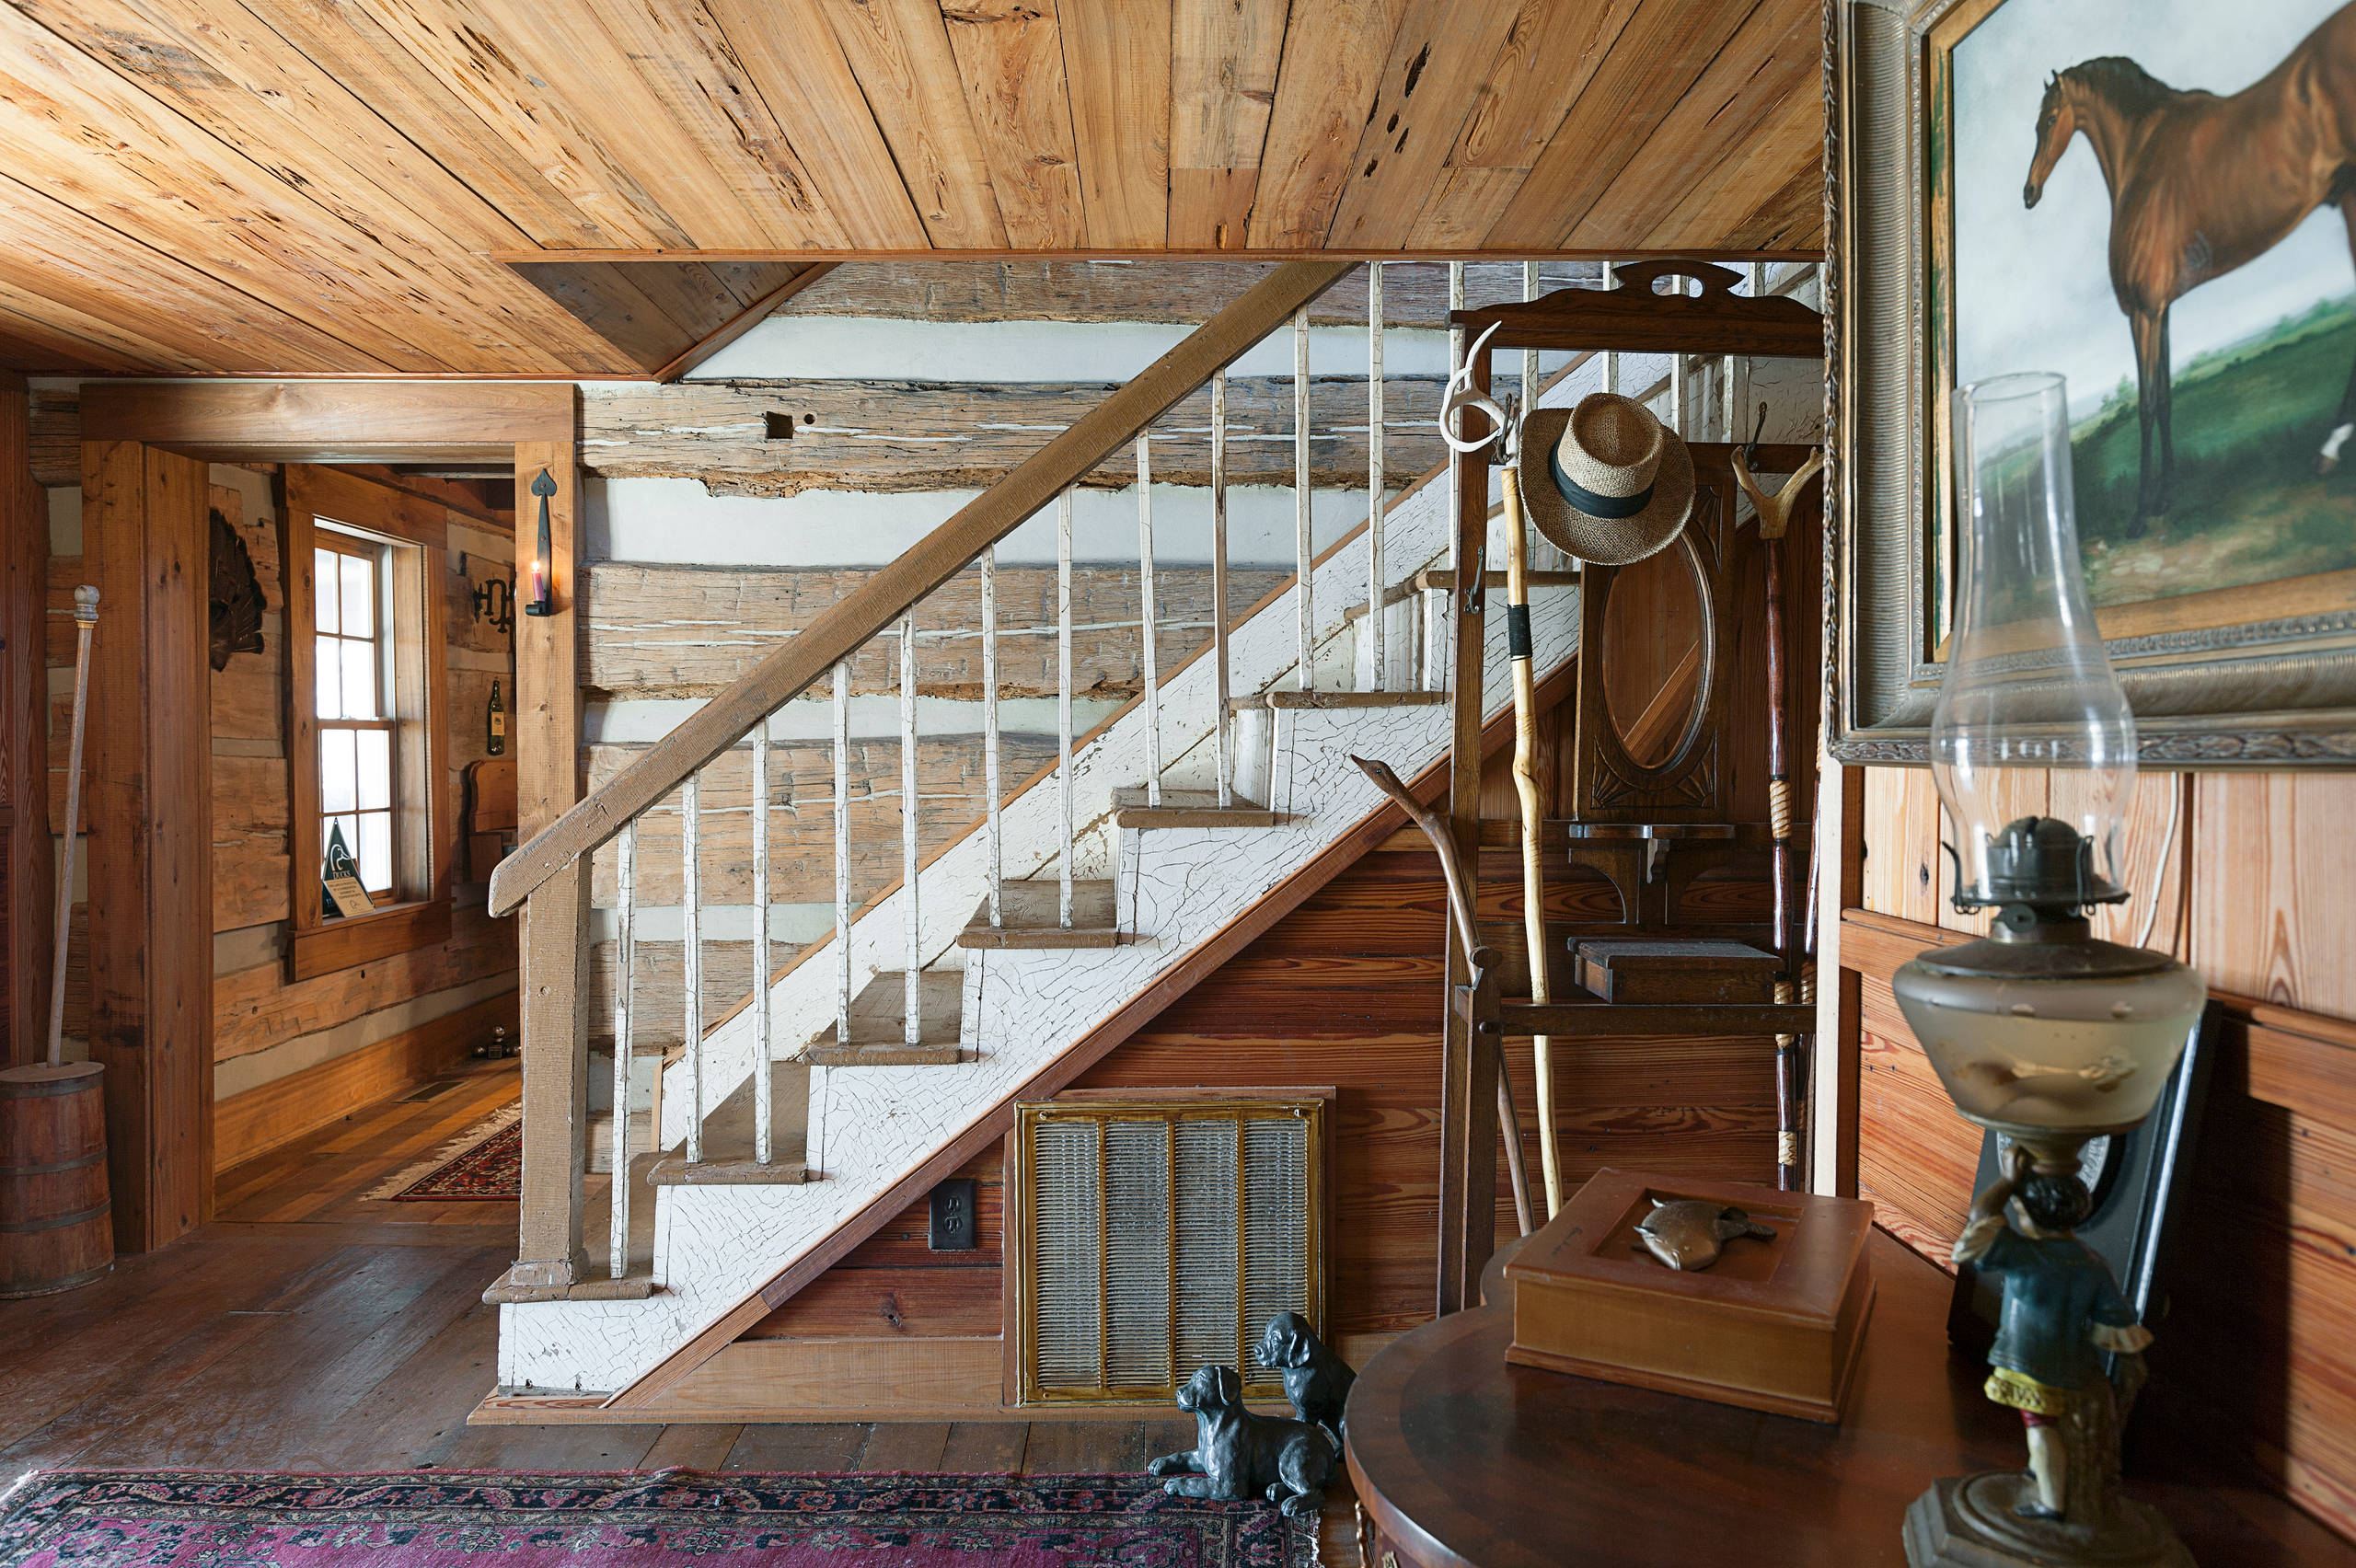 15 Enchanting Rustic Staircase Designs That You're Going To Fall In